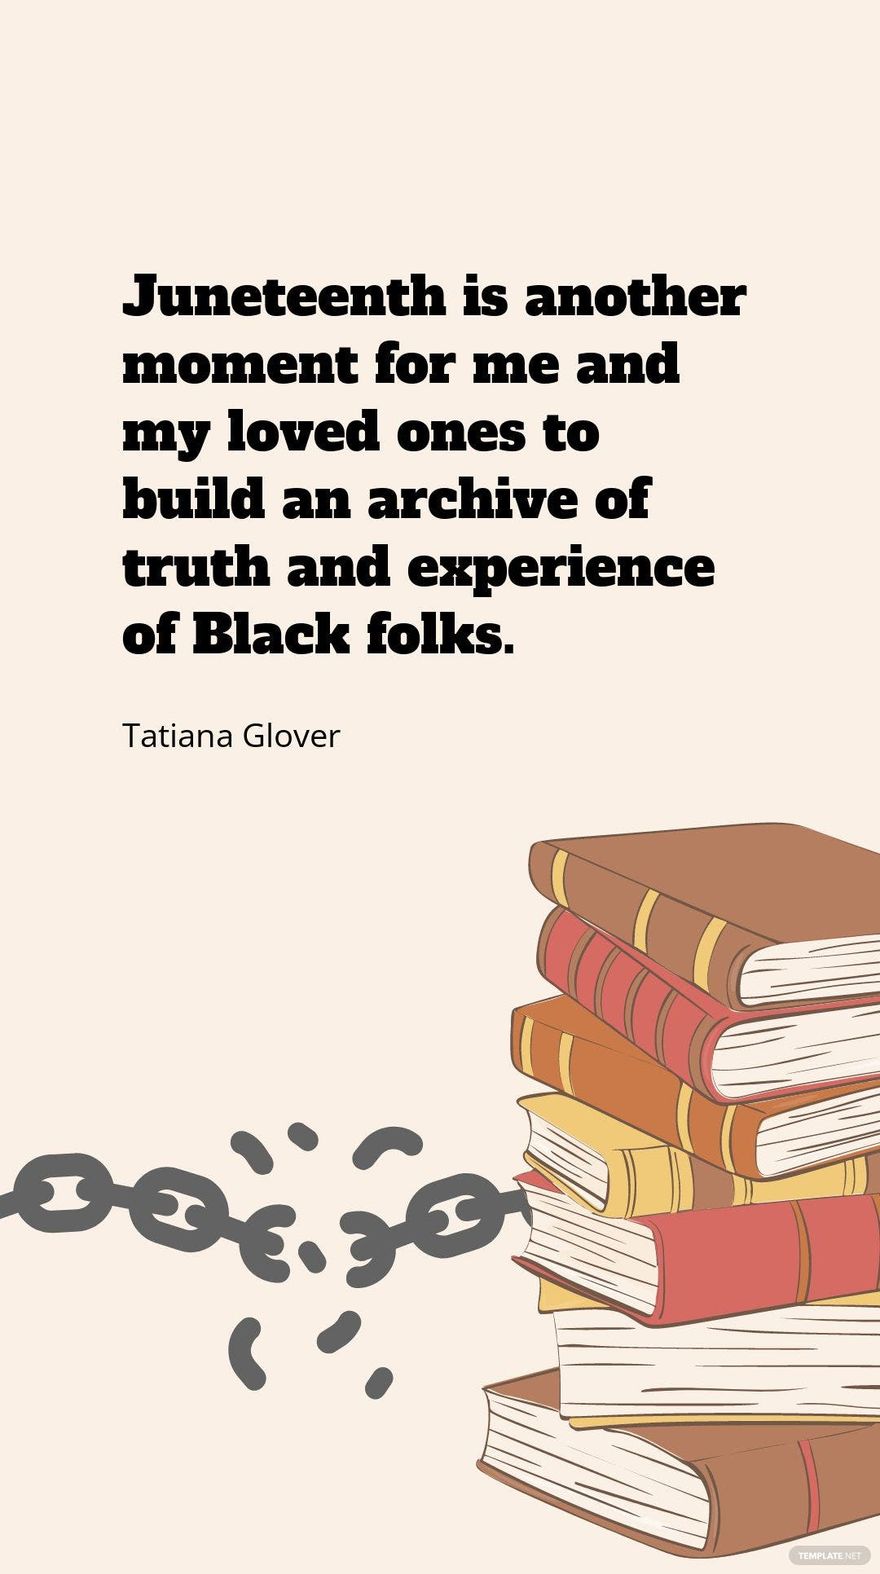 Free Tatiana Glover - Juneteenth is another moment for me and my loved ones to build an archive of truth and experience of Black folks. in JPG